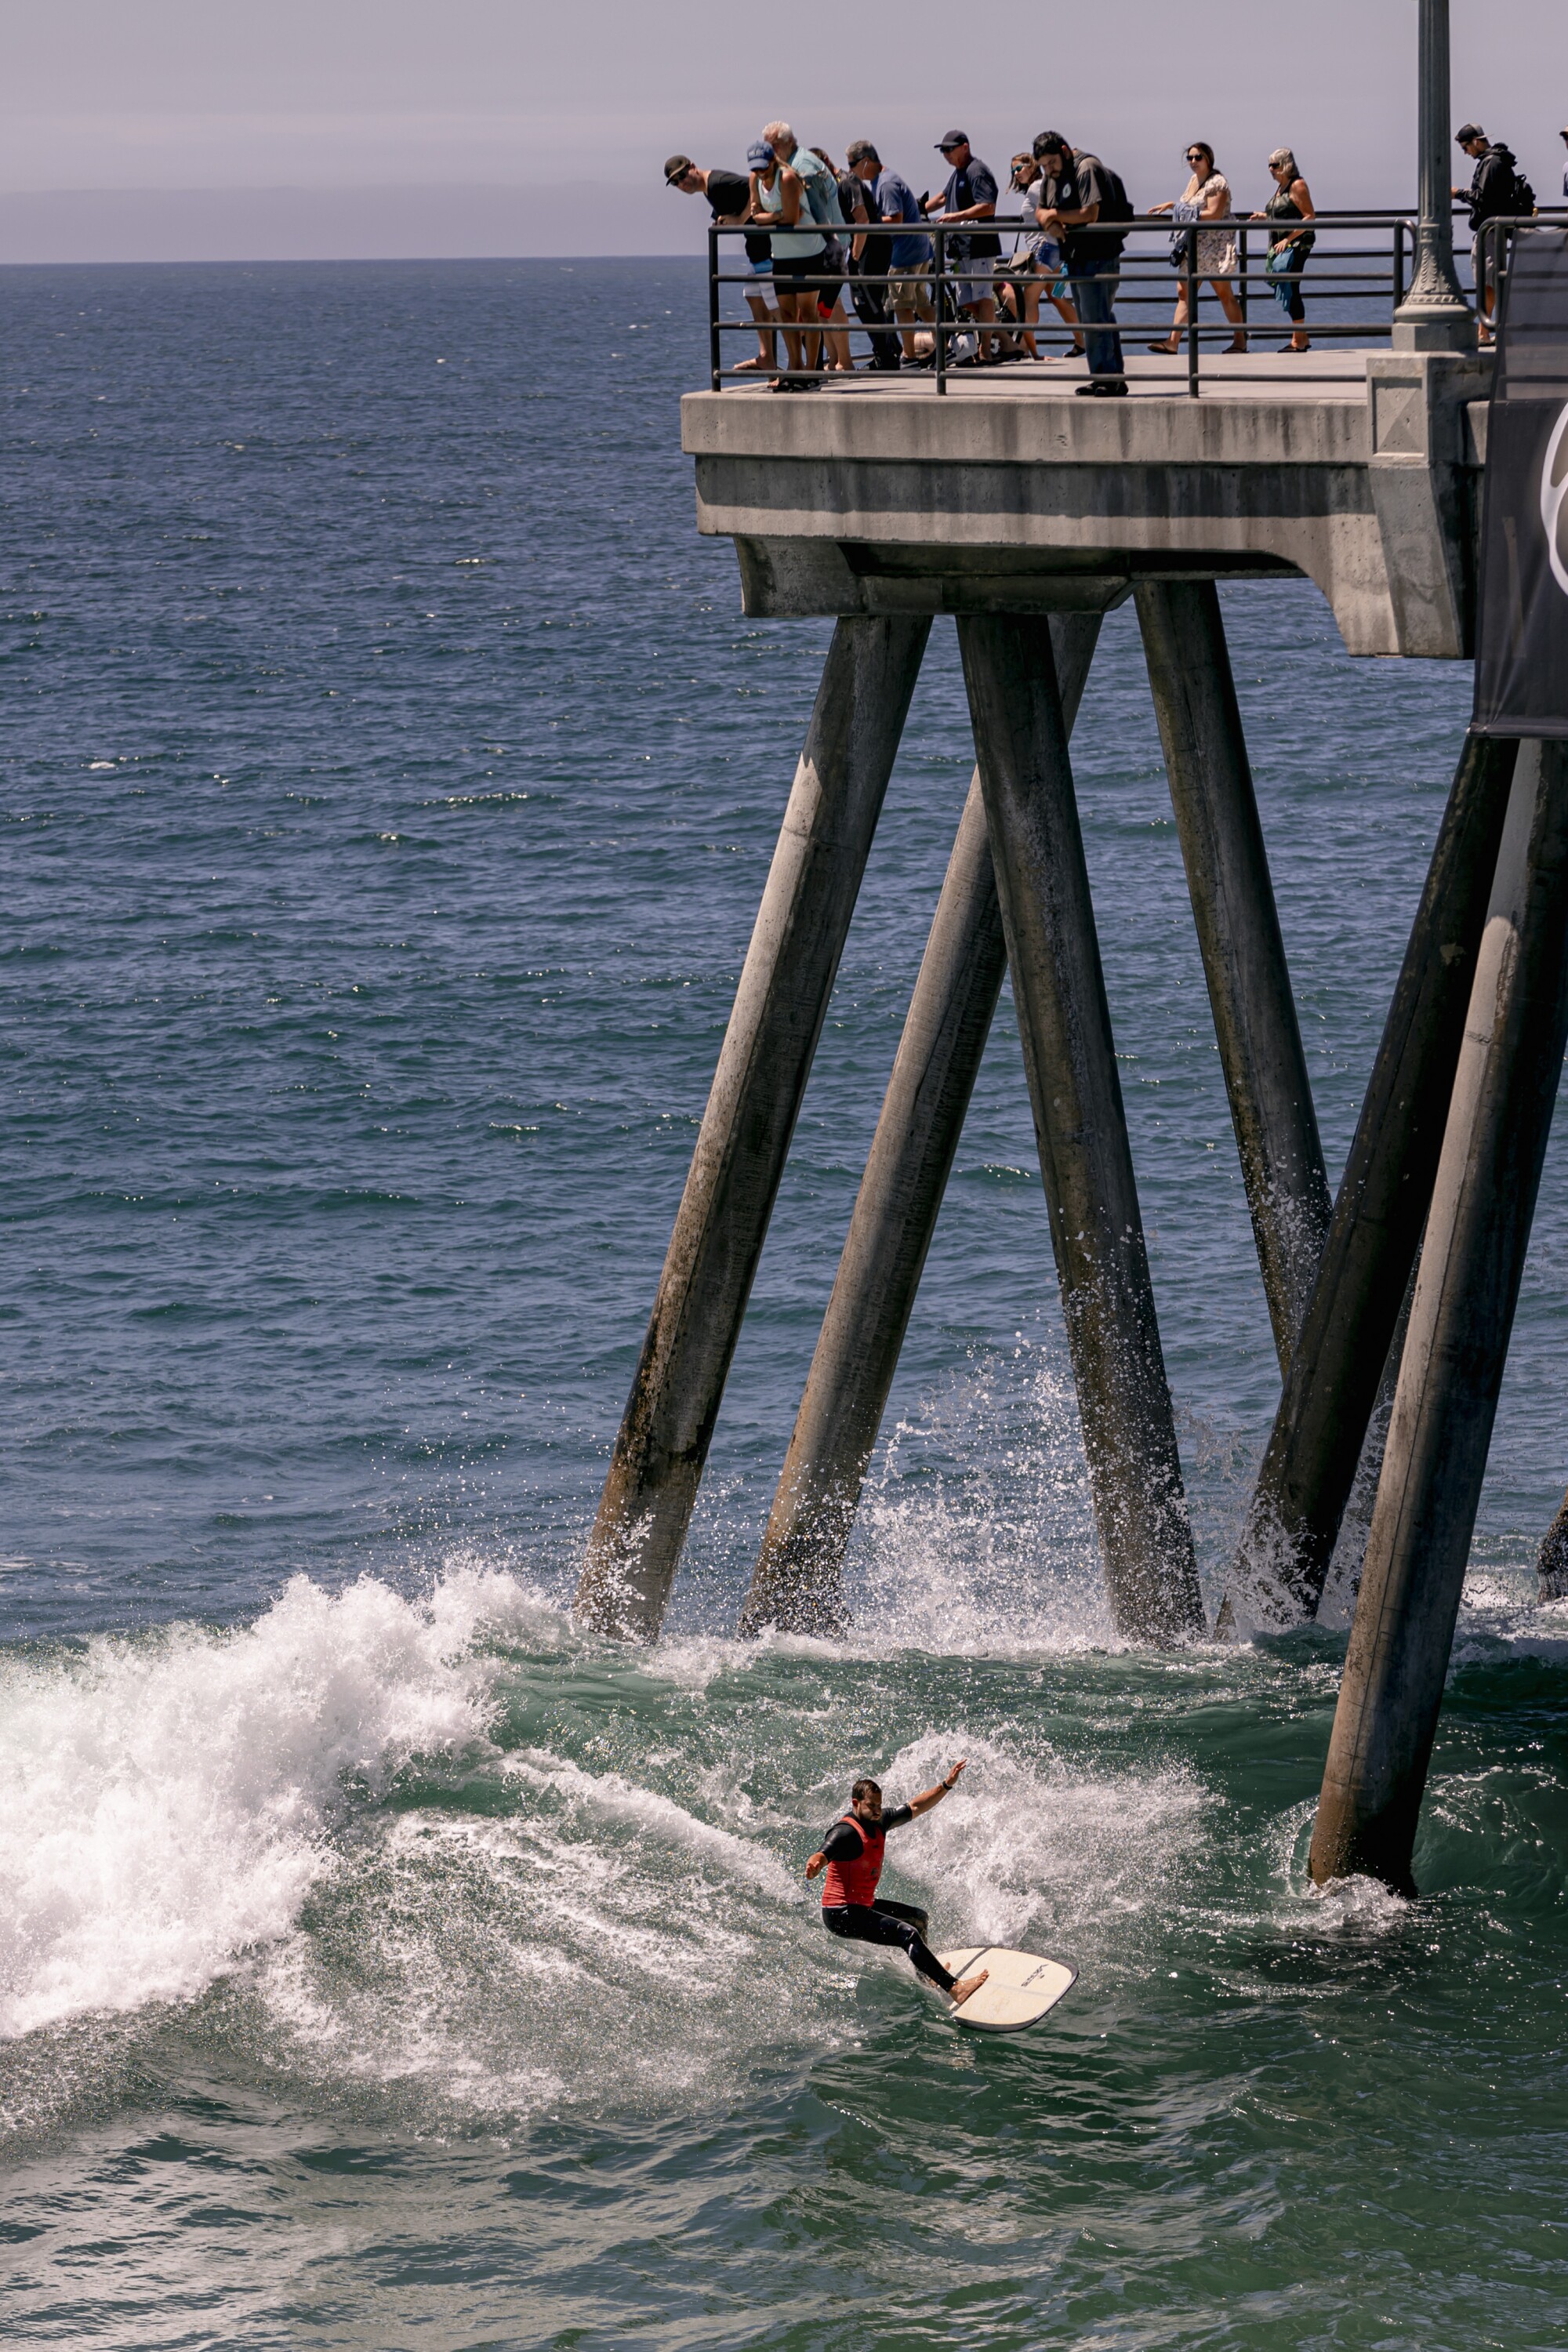 Harrison Roach competes in the longboard competition near the Huntington Beach pier at the U.S. Open of Surfing.